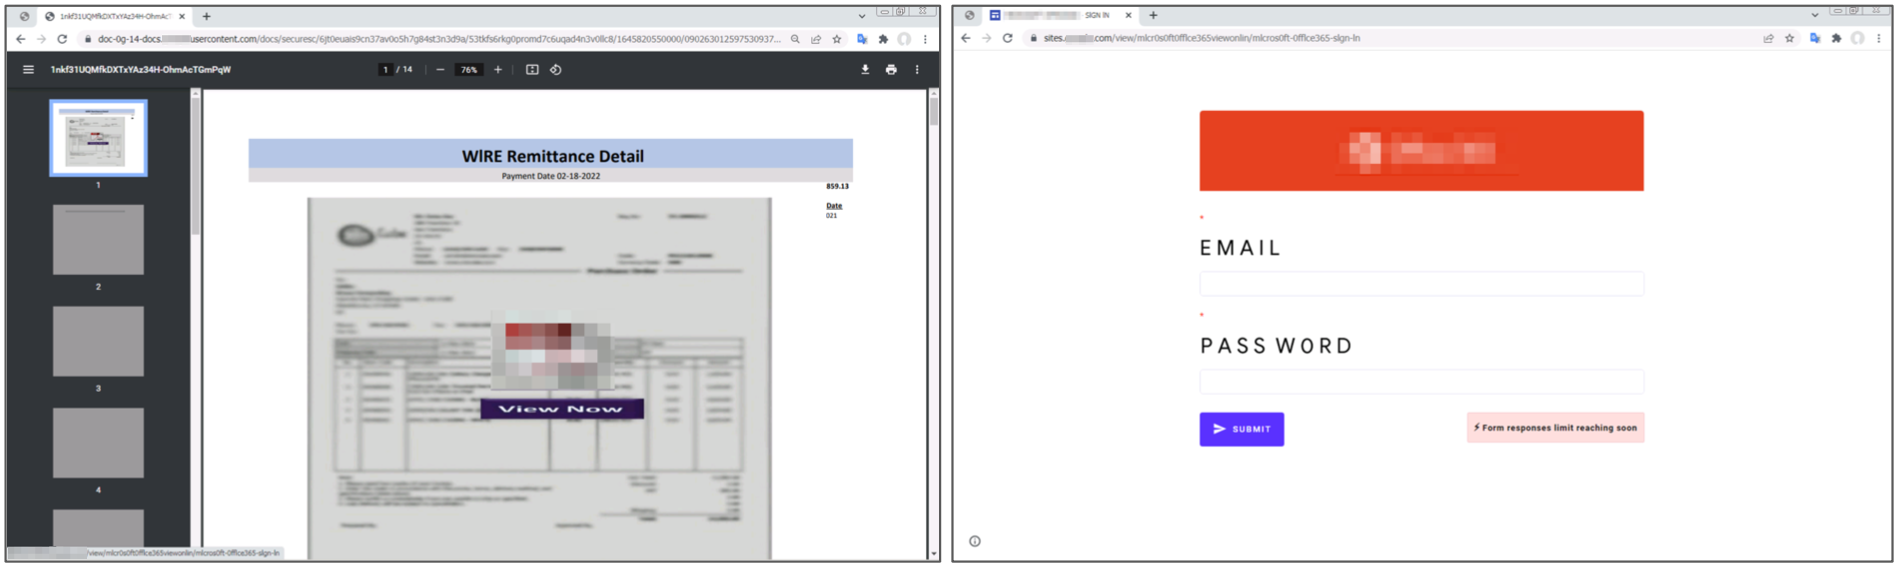 Left image shows a landing page for a phishing attack, hosted on a file-sharing site. Right shows a credential-stealing page built using a popular website building, linked to by the page on the left. 